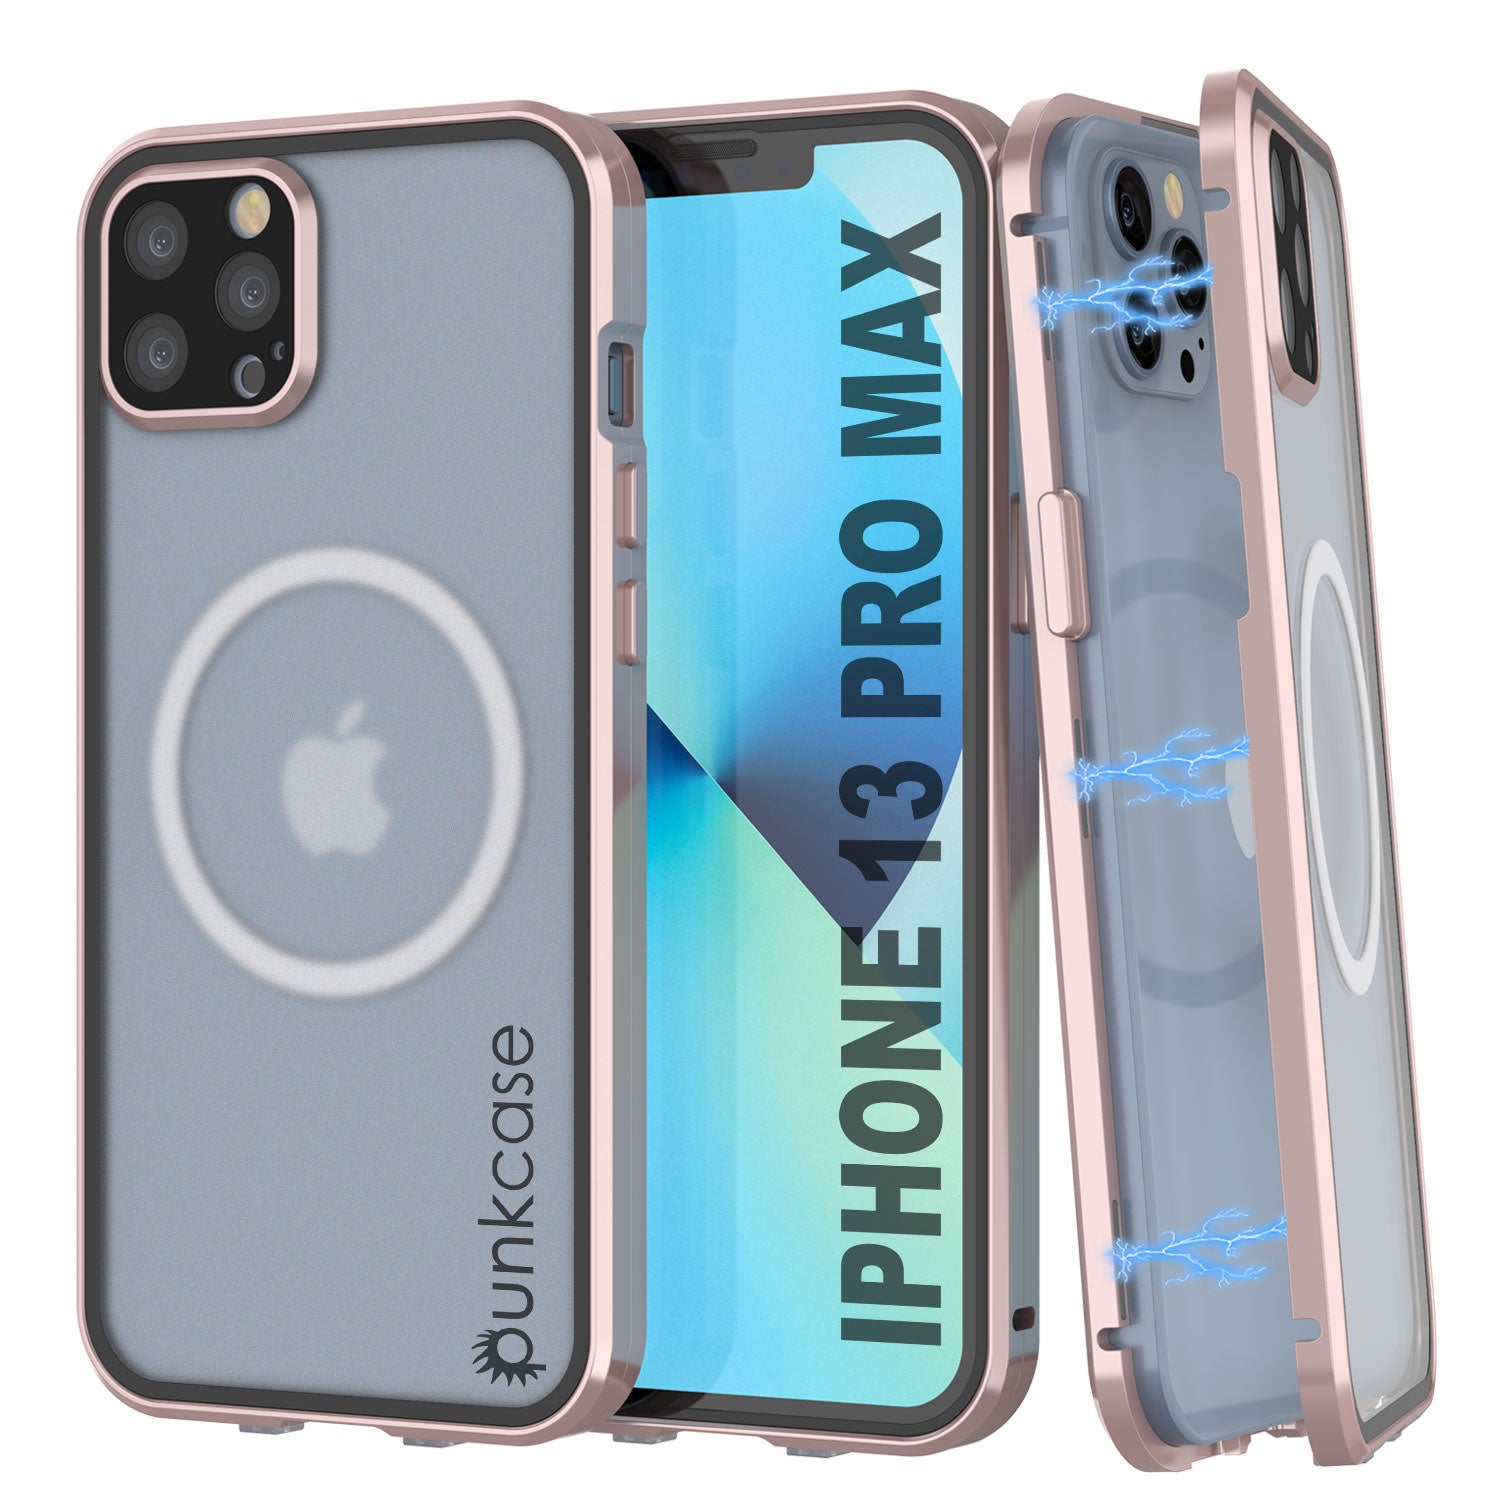 Punkcase iPhone 13 Pro Max Case [GlassMag Series] Cover W/ Built